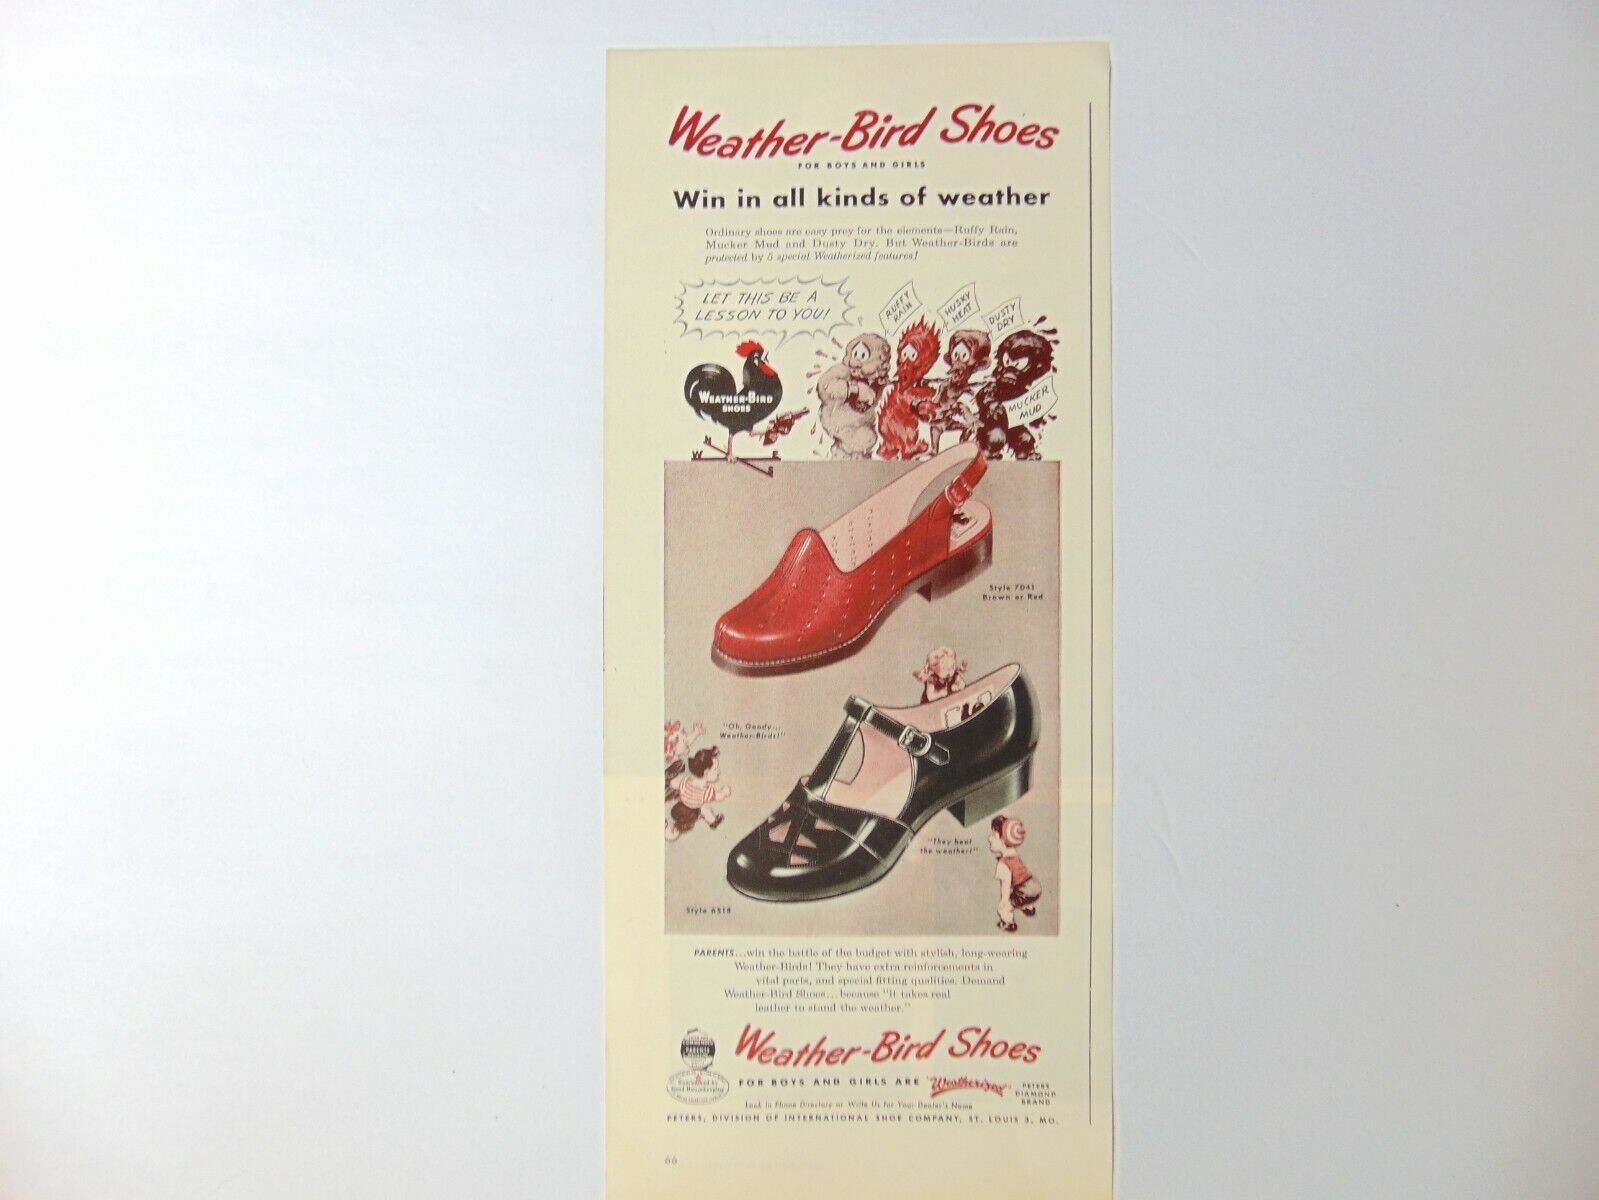 1947 WEATHER-BIRD SHOES Win In All Kinds of Weather vintage art print ad